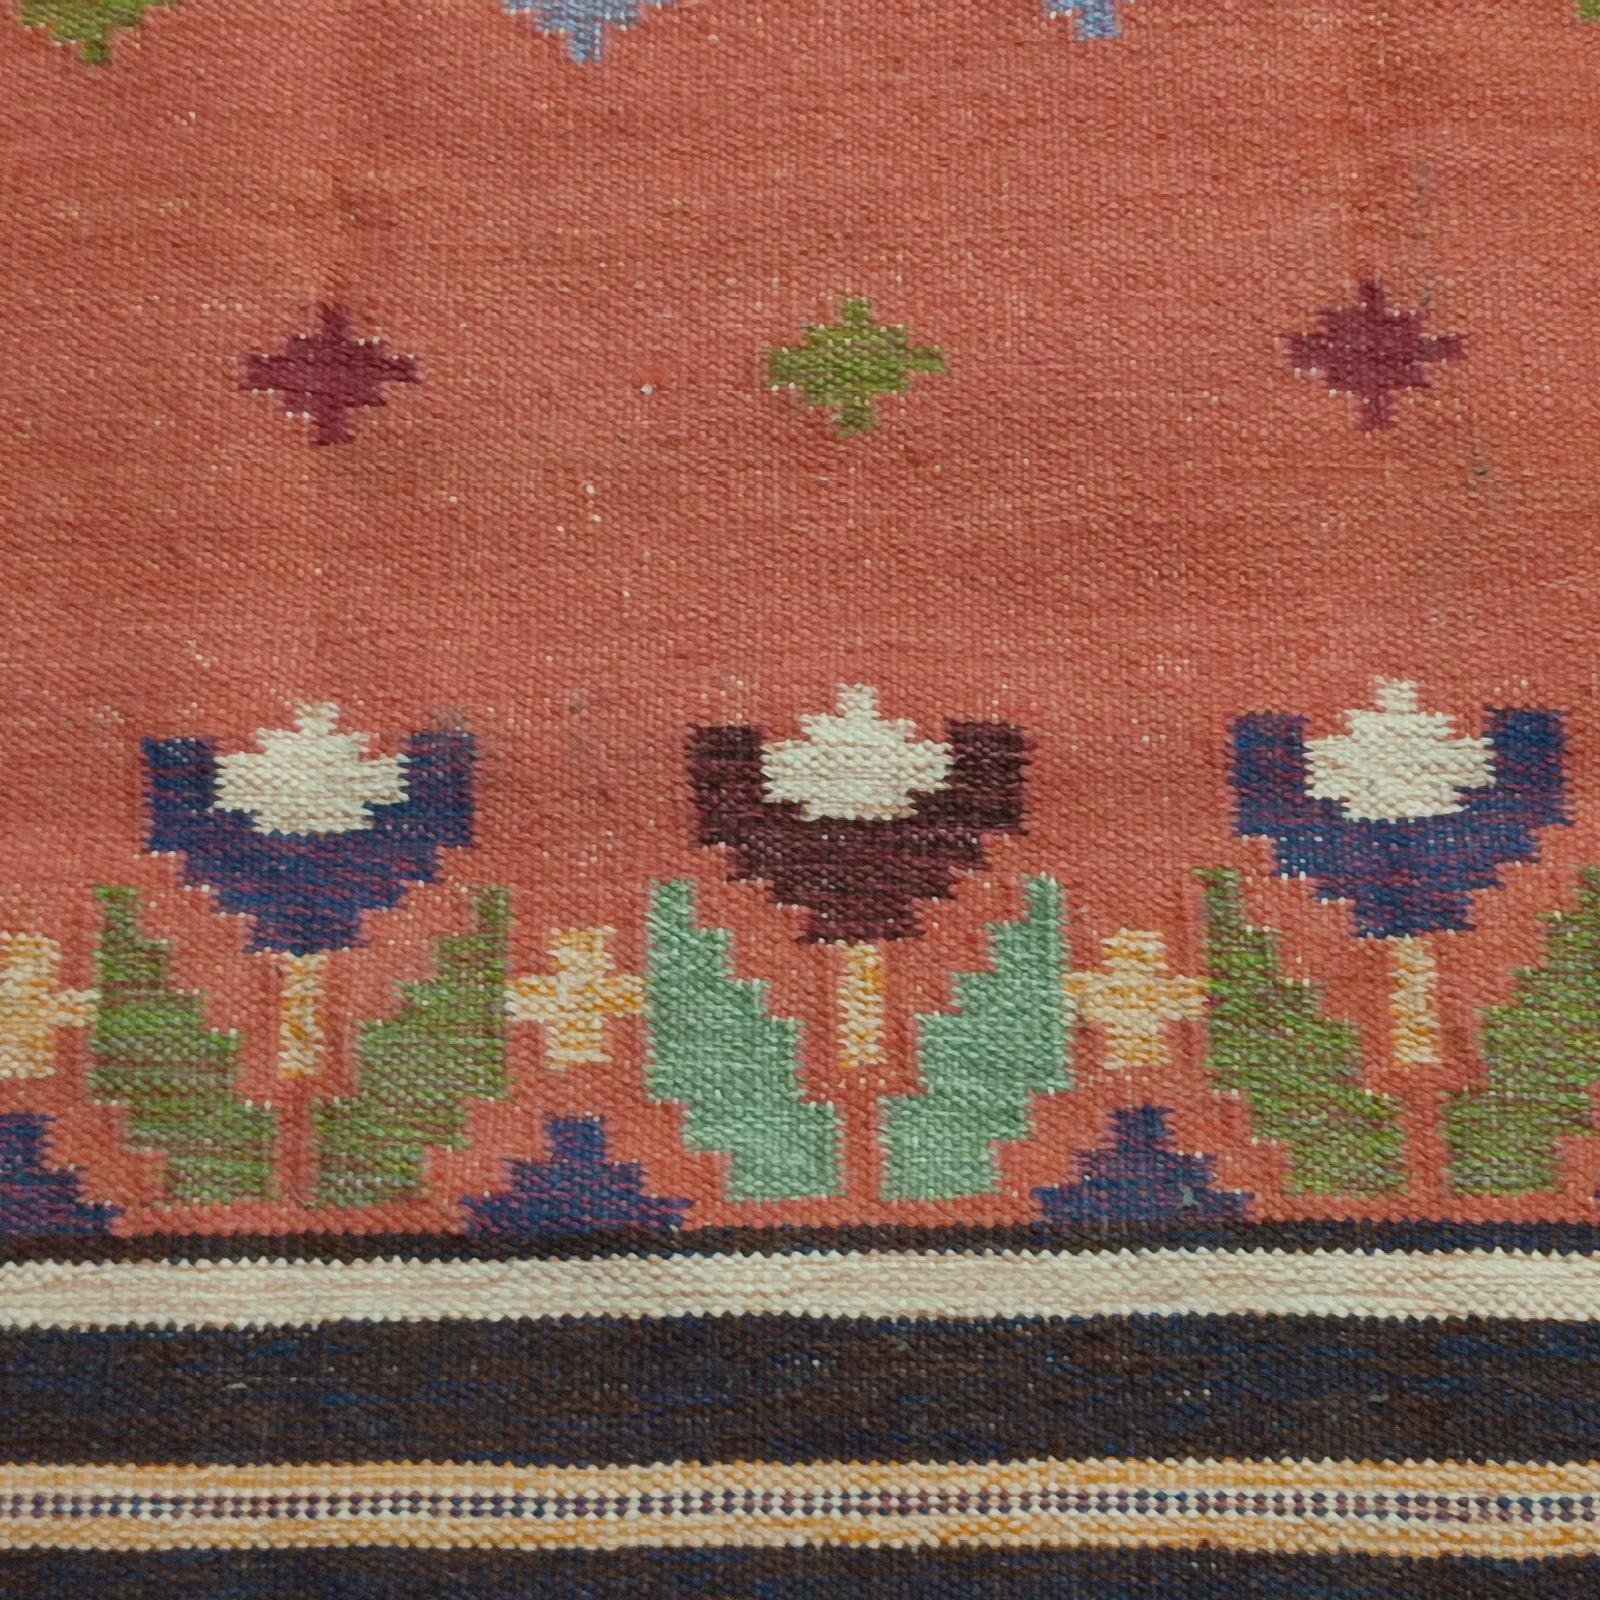 Wool Vintage Swedish Flat-Weave Rug Signed by Anna Johanna Angstrom